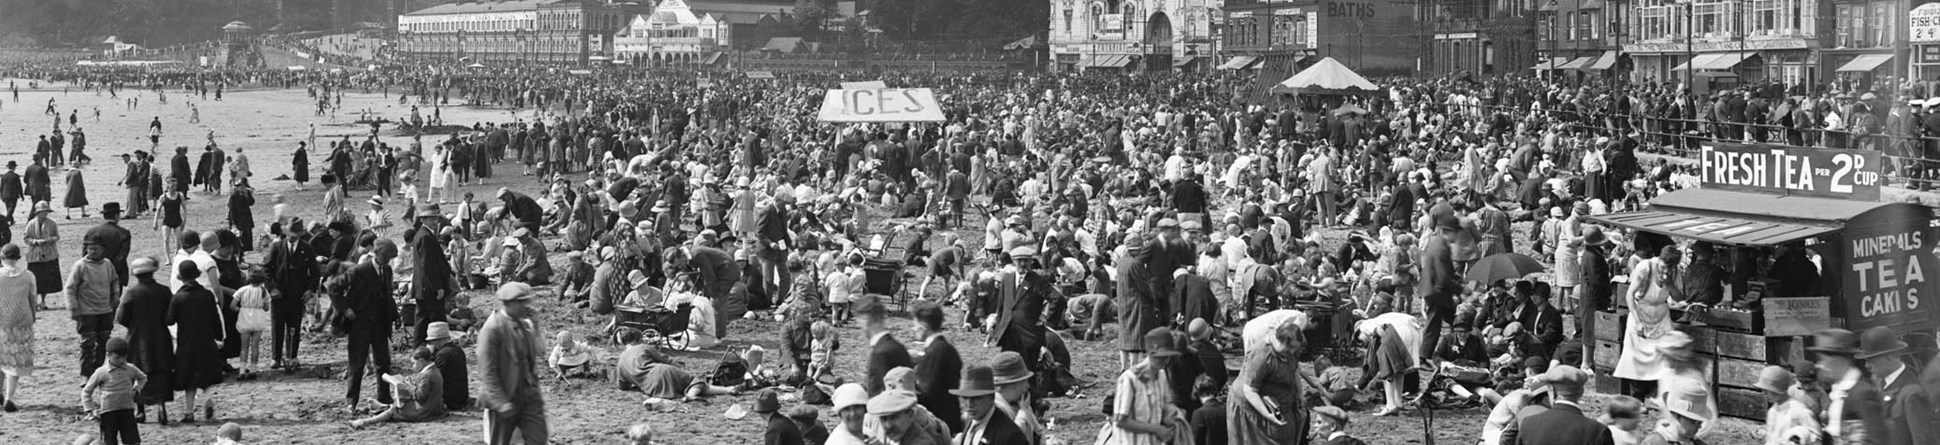 An archive photograph of a seaside resort beach scene with crowds in 1920s clothing.